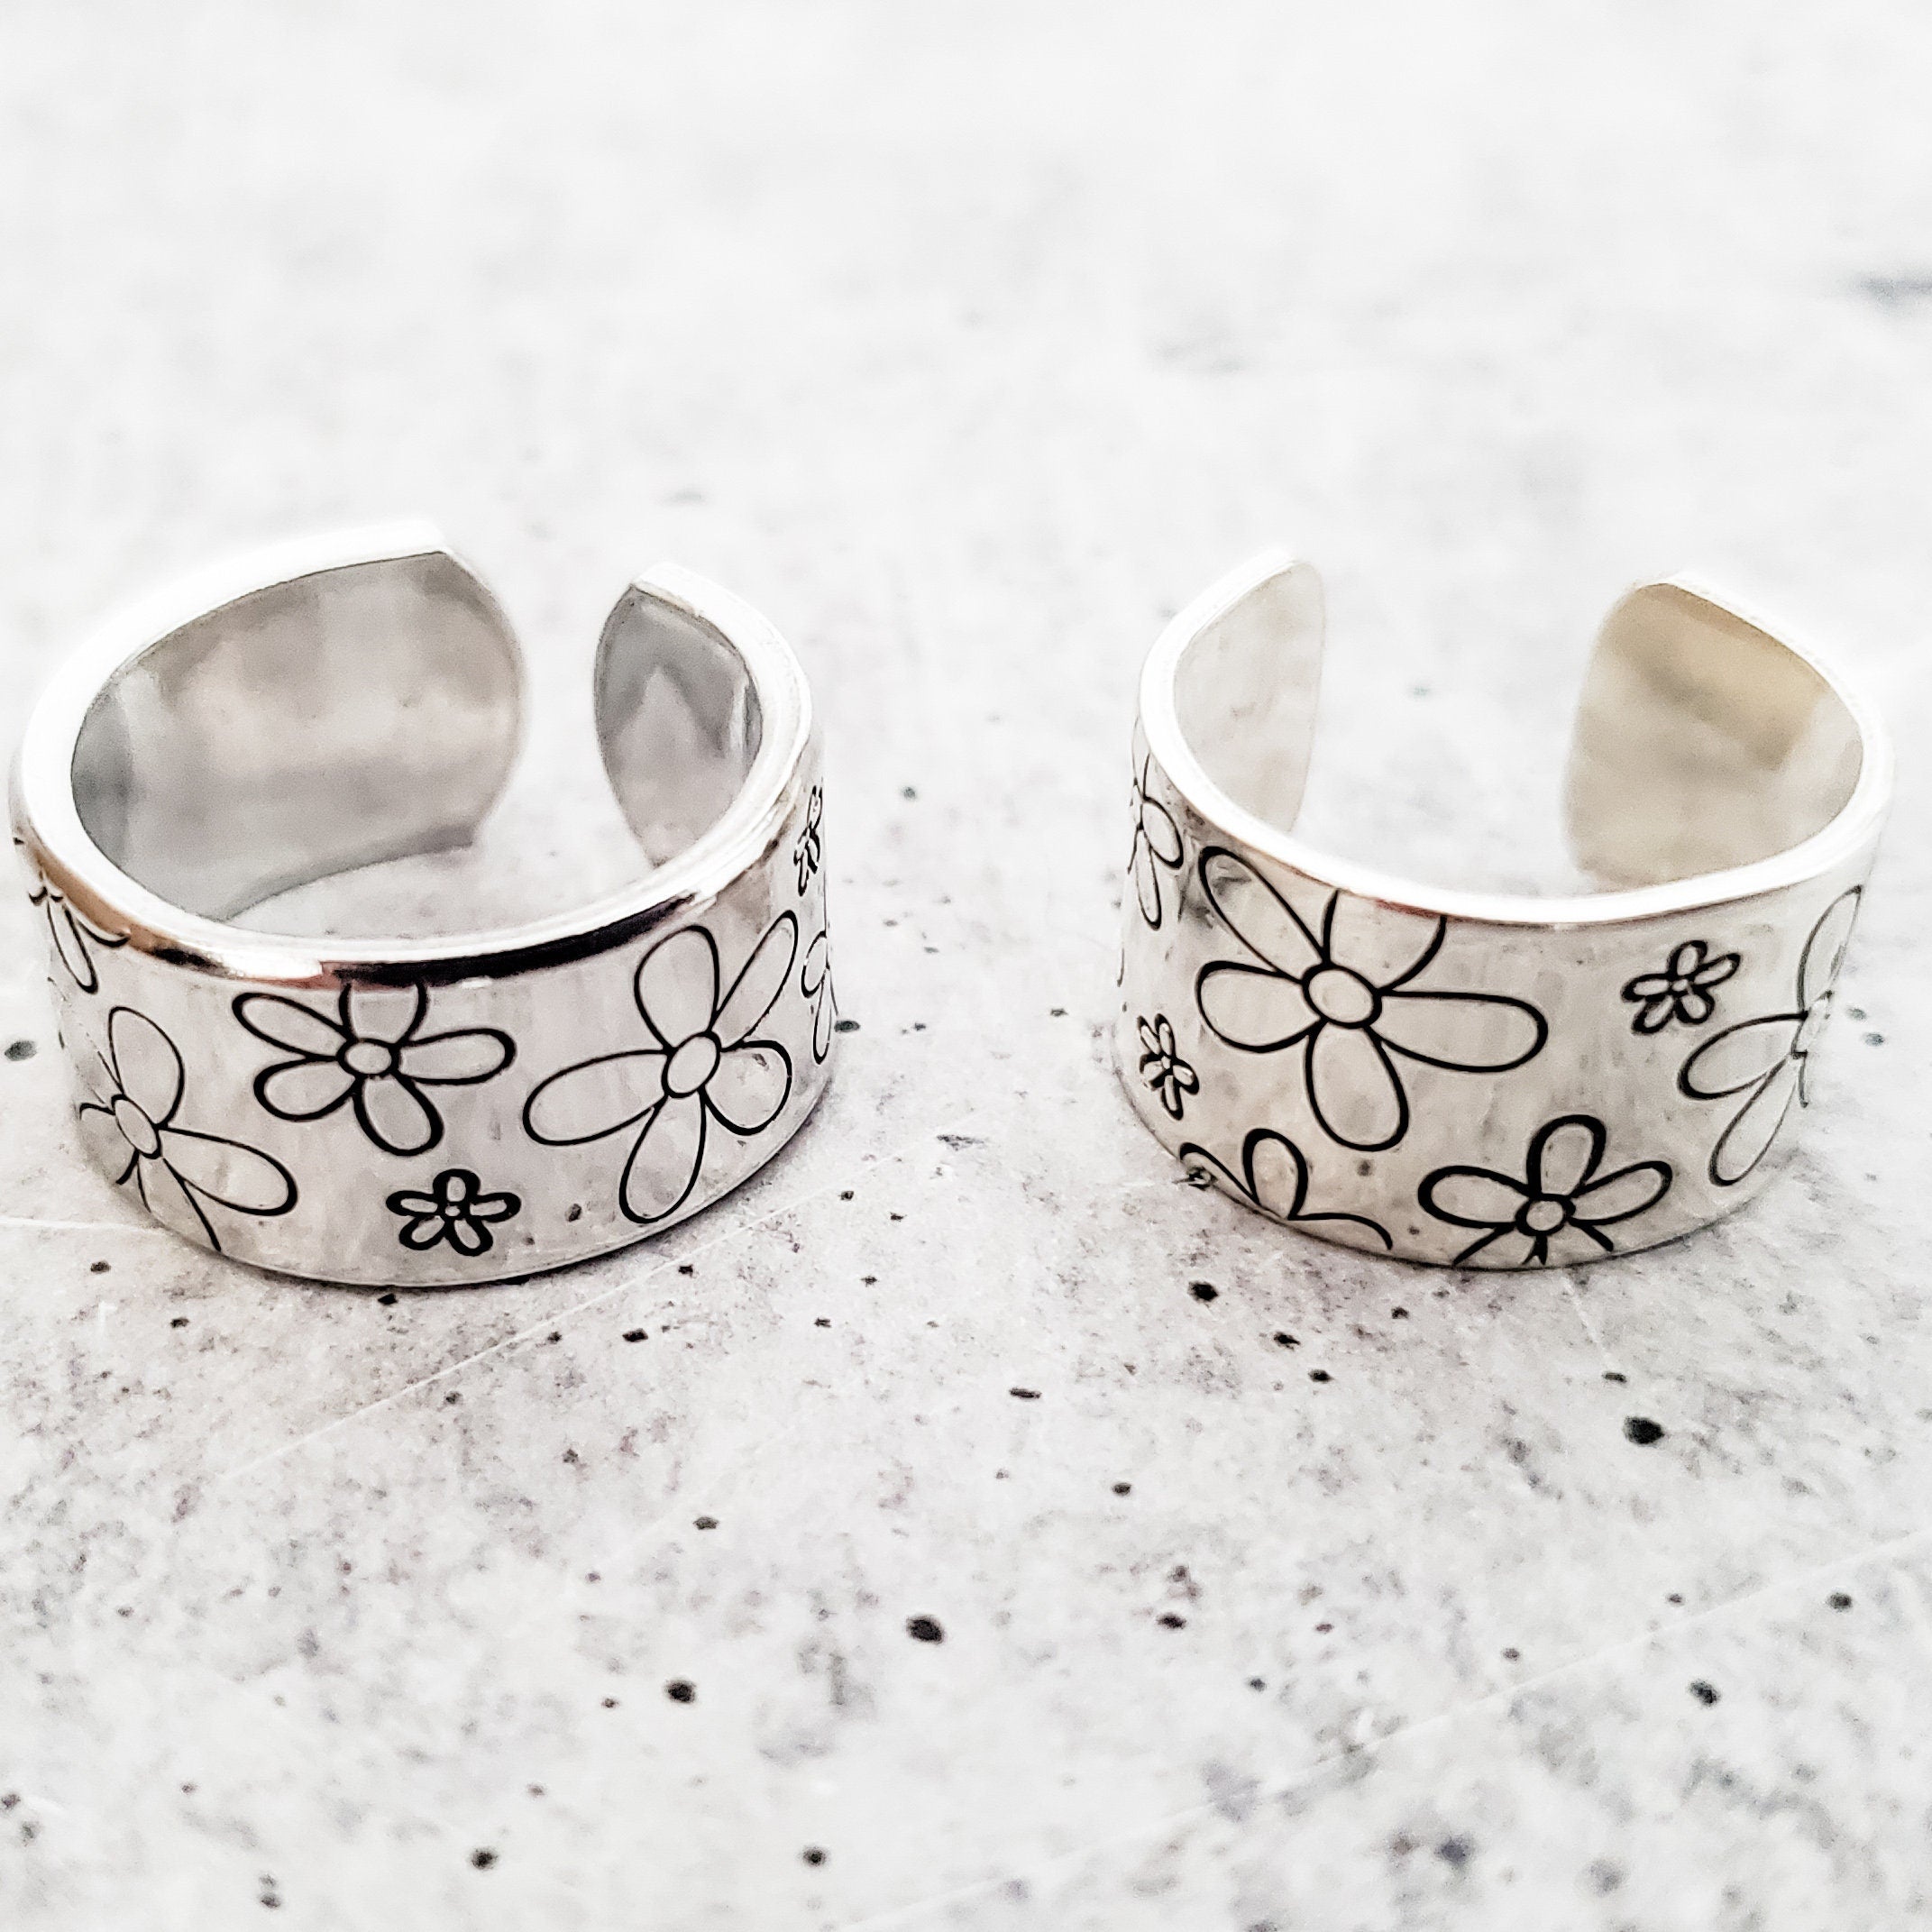 Daisy Ring - Silver Flower Ring with Daisies - Birthday Gift for Daughter - Teen Jewelry - Silver Band Ring for Her - Daisy Flower Jewelry